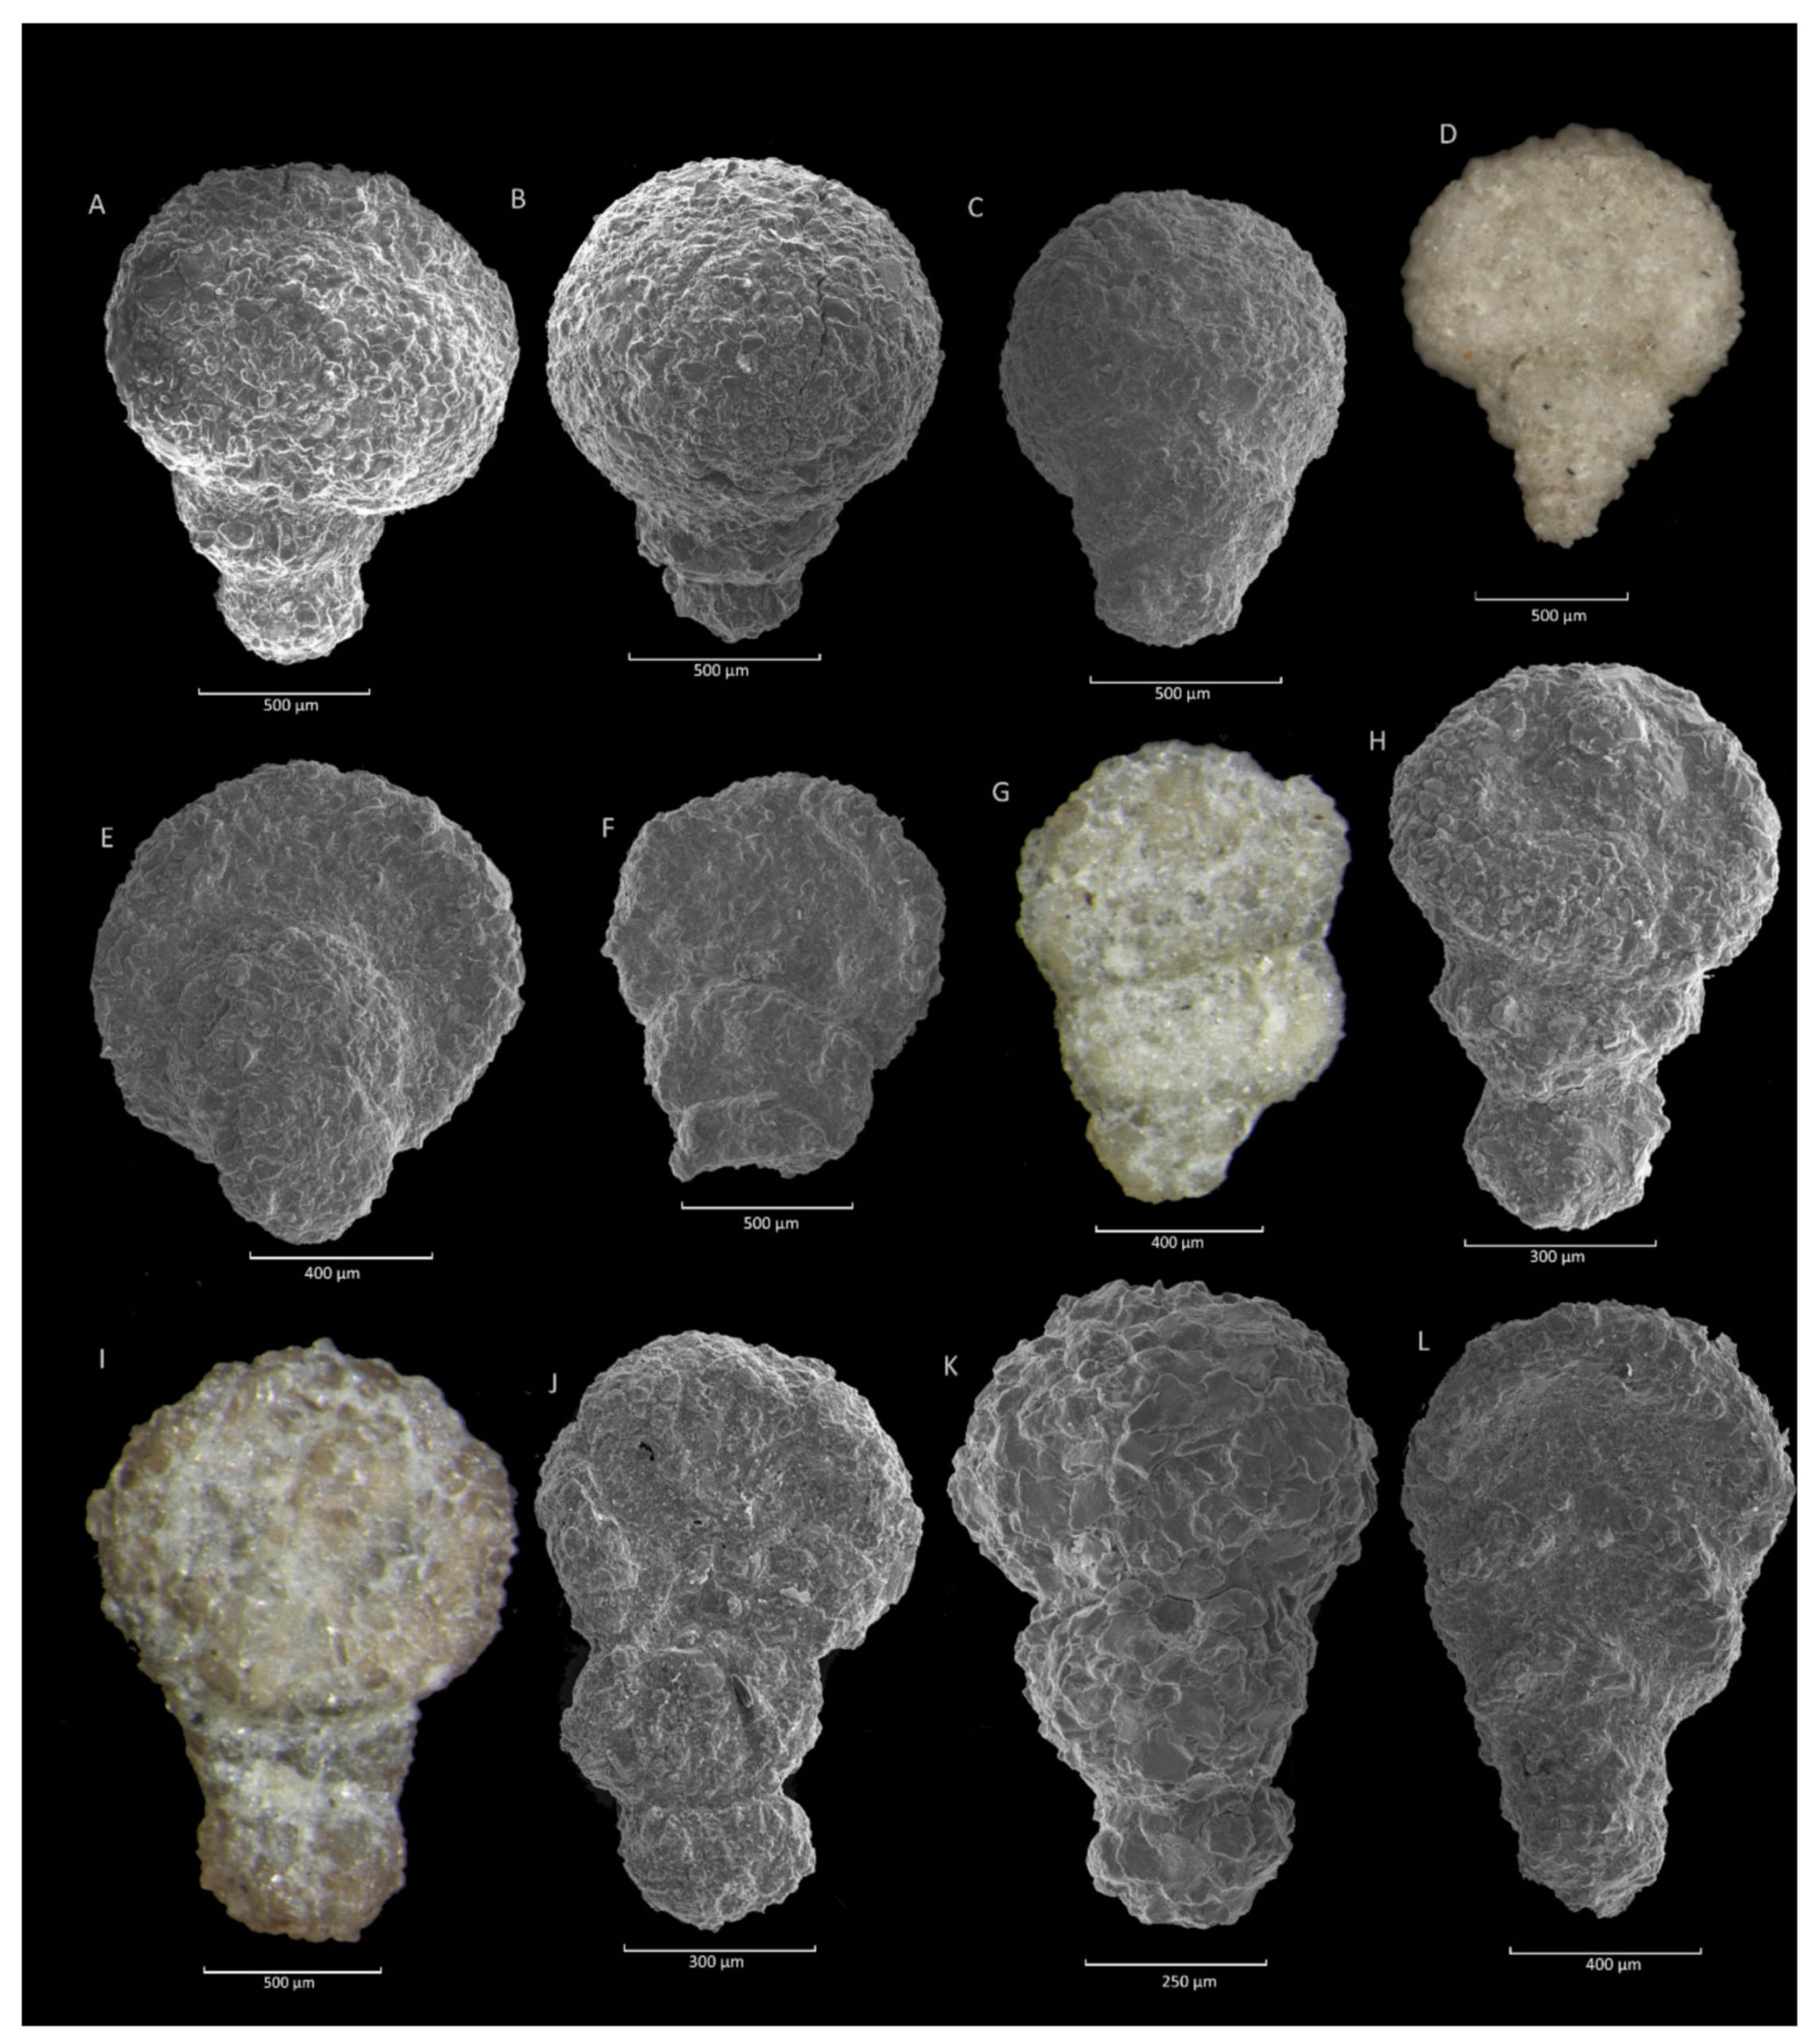 Geosciences | Free Full-Text | Agglutinated Foraminiferal Acmes and Their  Role in the Biostratigraphy of the Campanian–Eocene Outer Carpathians